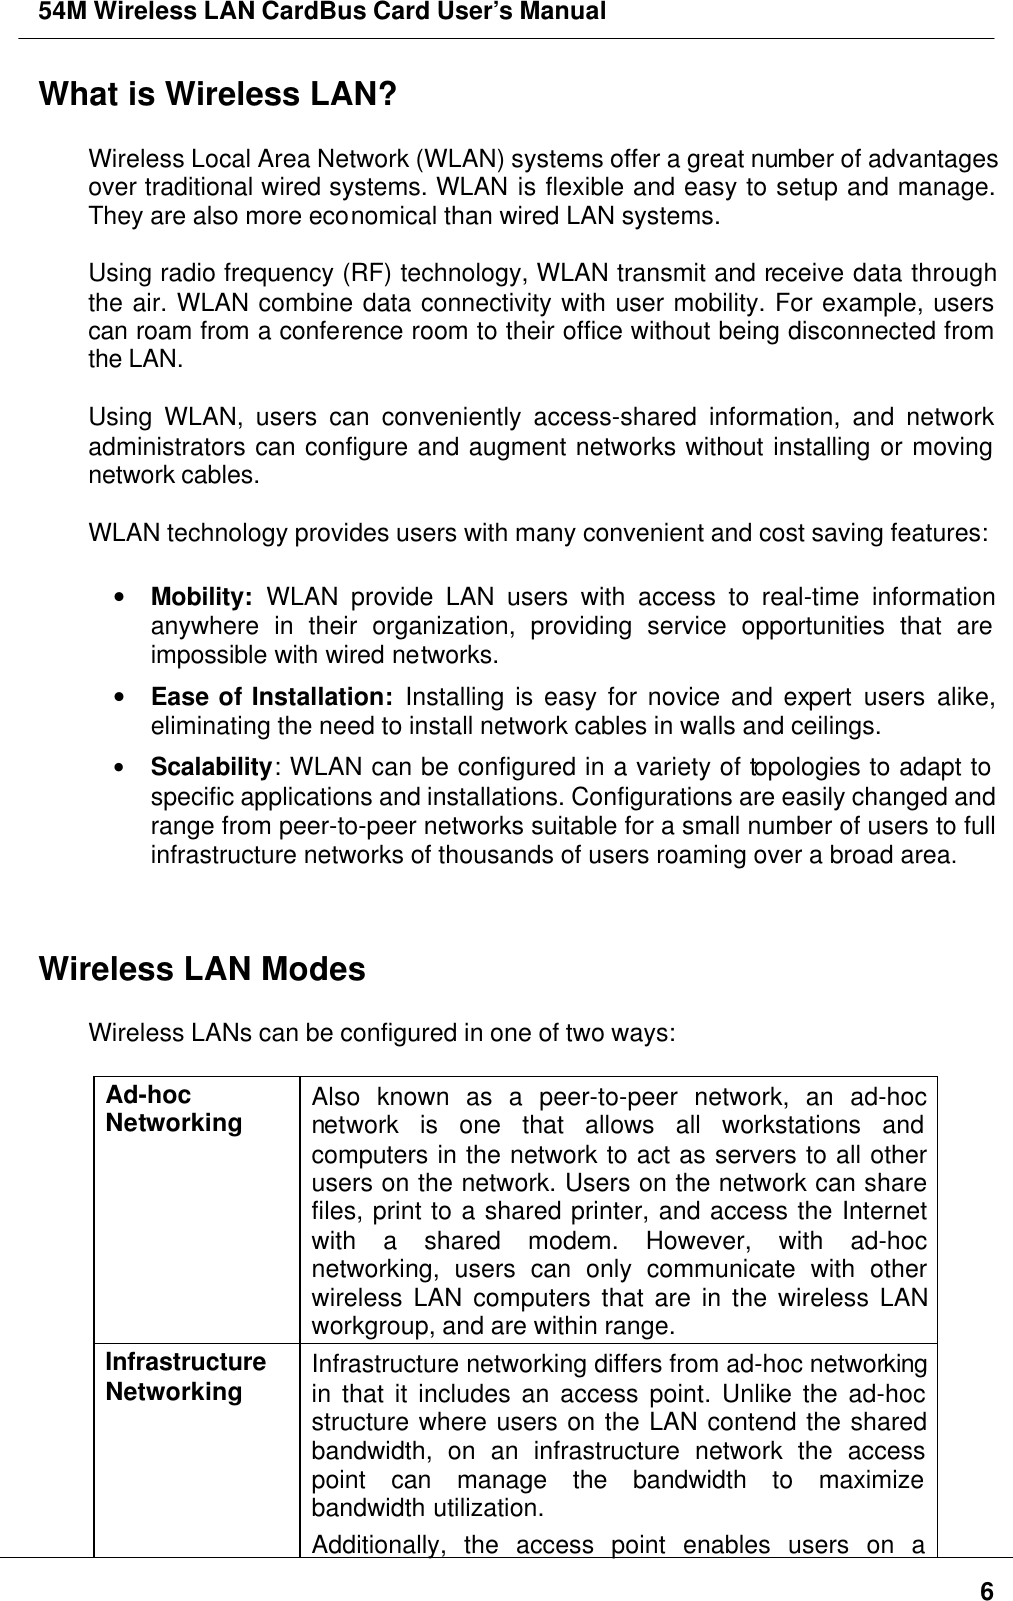 54M Wireless LAN CardBus Card User’s Manual6What is Wireless LAN?Wireless Local Area Network (WLAN) systems offer a great number of advantagesover traditional wired systems. WLAN is flexible and easy to setup and manage.They are also more economical than wired LAN systems.Using radio frequency (RF) technology, WLAN transmit and receive data throughthe air. WLAN combine data connectivity with user mobility. For example, userscan roam from a conference room to their office without being disconnected fromthe LAN.Using WLAN, users can conveniently access-shared information, and networkadministrators can configure and augment networks without installing or movingnetwork cables.WLAN technology provides users with many convenient and cost saving features:• Mobility: WLAN provide LAN users with access to real-time informationanywhere in their organization, providing service opportunities that areimpossible with wired networks.• Ease of Installation: Installing is easy for novice and expert users alike,eliminating the need to install network cables in walls and ceilings.• Scalability: WLAN can be configured in a variety of topologies to adapt tospecific applications and installations. Configurations are easily changed andrange from peer-to-peer networks suitable for a small number of users to fullinfrastructure networks of thousands of users roaming over a broad area.Wireless LAN ModesWireless LANs can be configured in one of two ways:Ad-hocNetworking Also known as a peer-to-peer network, an ad-hocnetwork is one that allows all workstations andcomputers in the network to act as servers to all otherusers on the network. Users on the network can sharefiles, print to a shared printer, and access the Internetwith a shared modem. However, with ad-hocnetworking, users can only communicate with otherwireless LAN computers that are in the wireless LANworkgroup, and are within range.InfrastructureNetworking Infrastructure networking differs from ad-hoc networkingin that it includes an access point. Unlike the ad-hocstructure where users on the LAN contend the sharedbandwidth, on an infrastructure network the accesspoint can manage the bandwidth to maximizebandwidth utilization.Additionally, the access point enables users on a